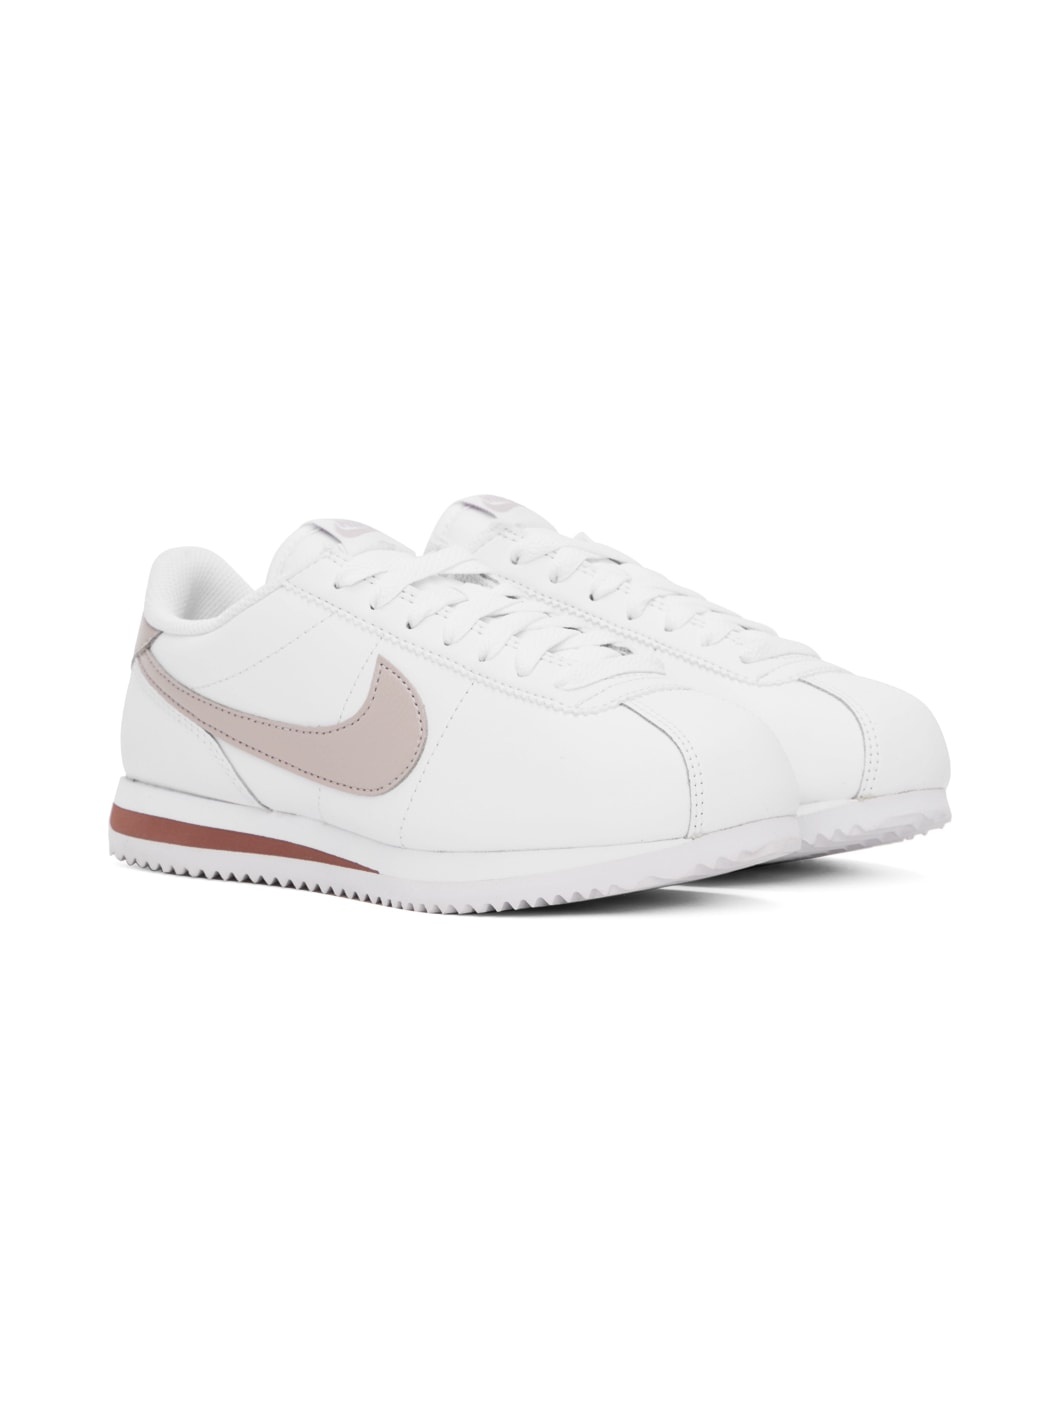 White & Pink Cortez Sneakers - 4